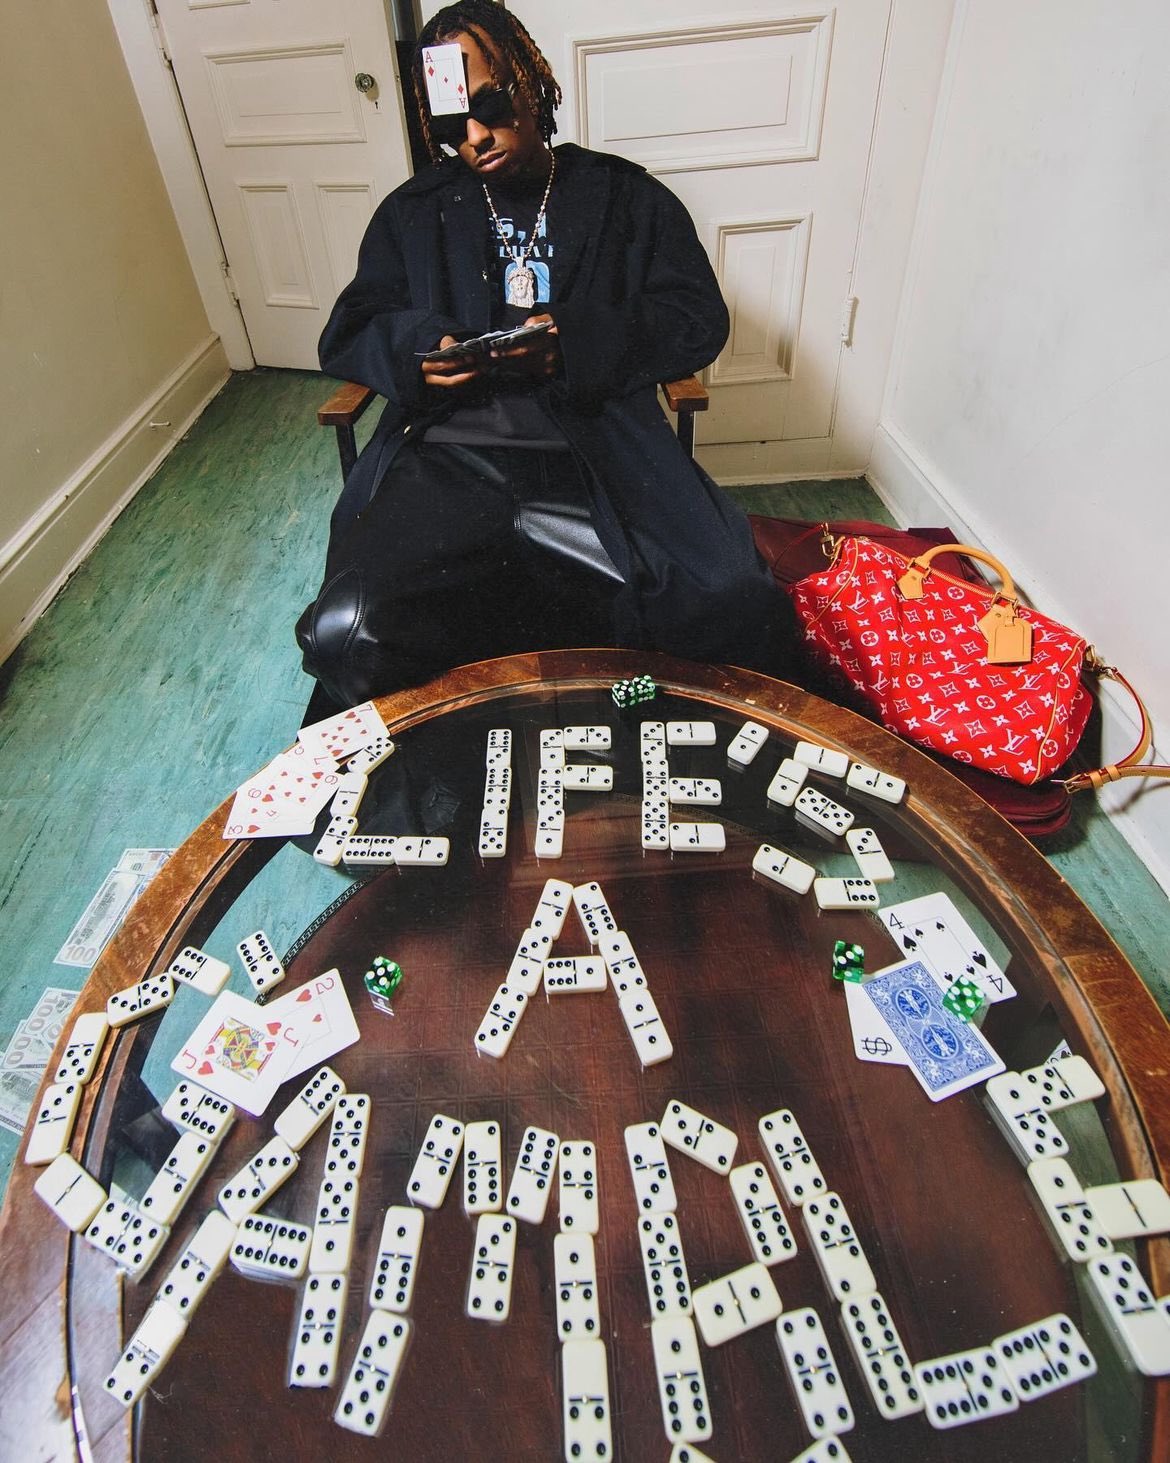 rich the kid life's a gamble download free download leak